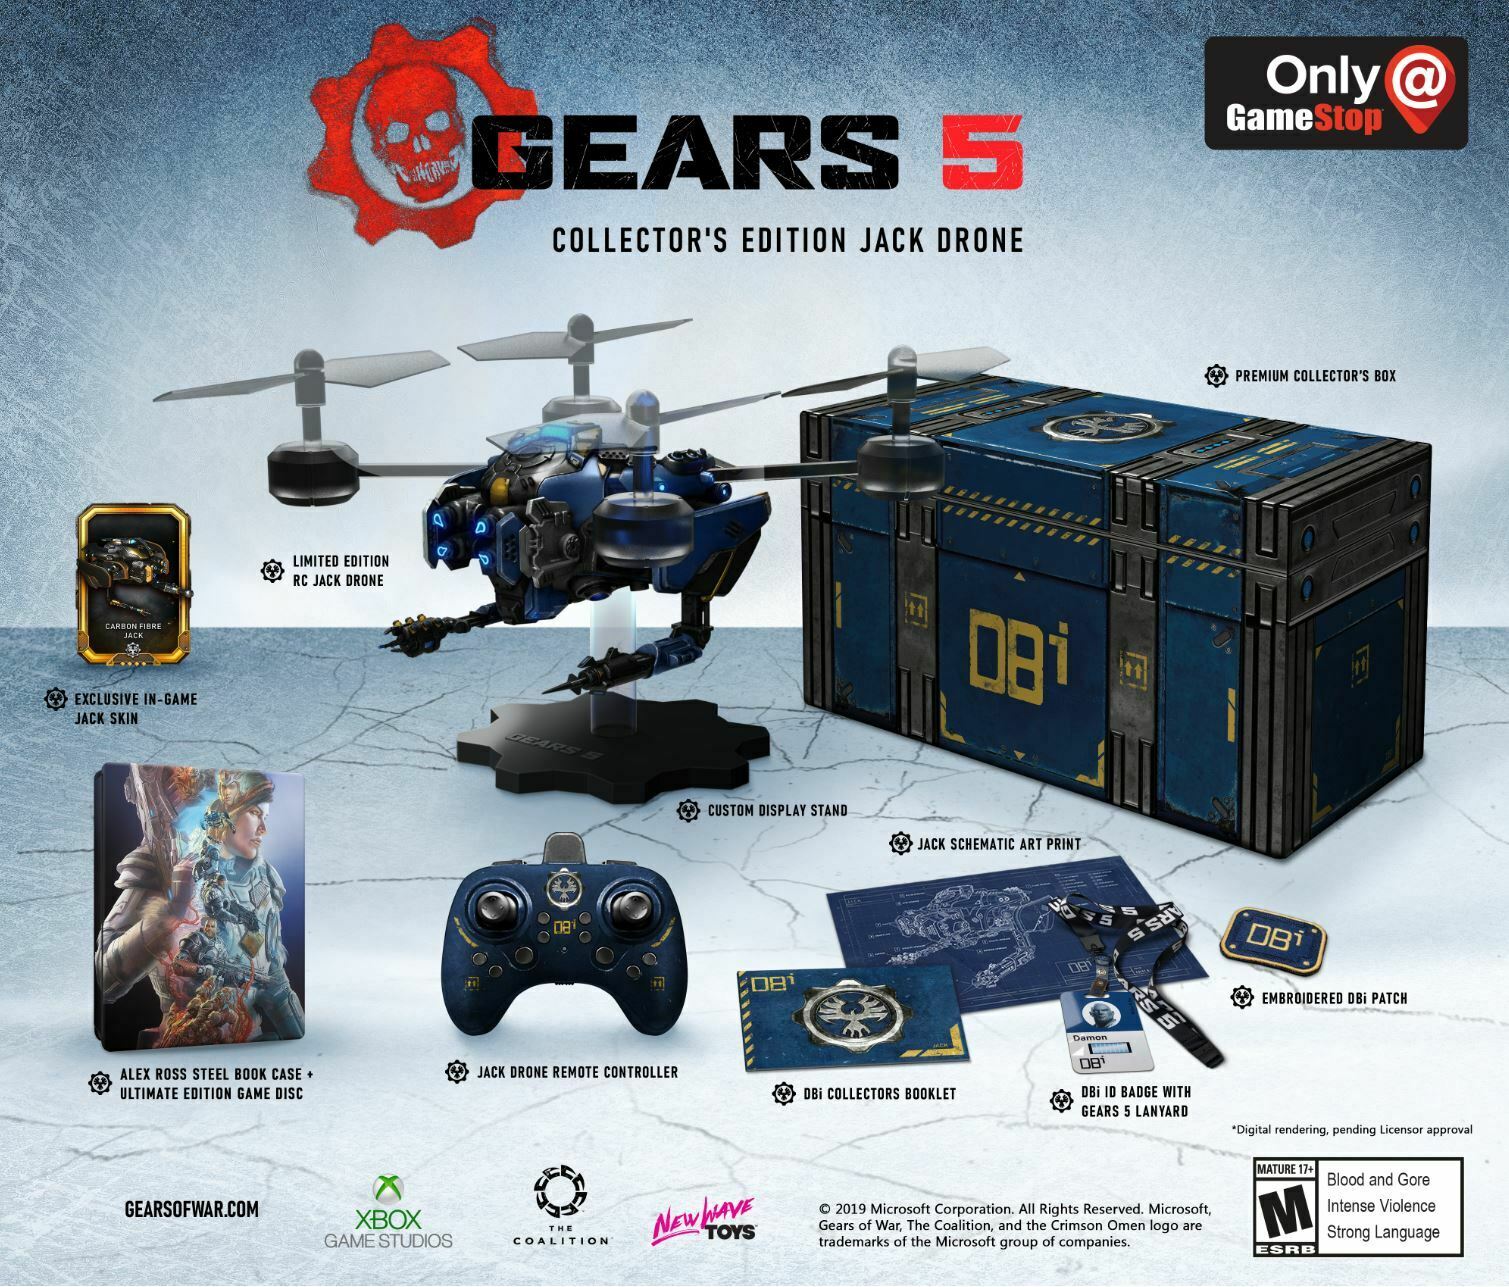 Gears-5-Ultimate-Edition-and-Jack-Drone.jpg